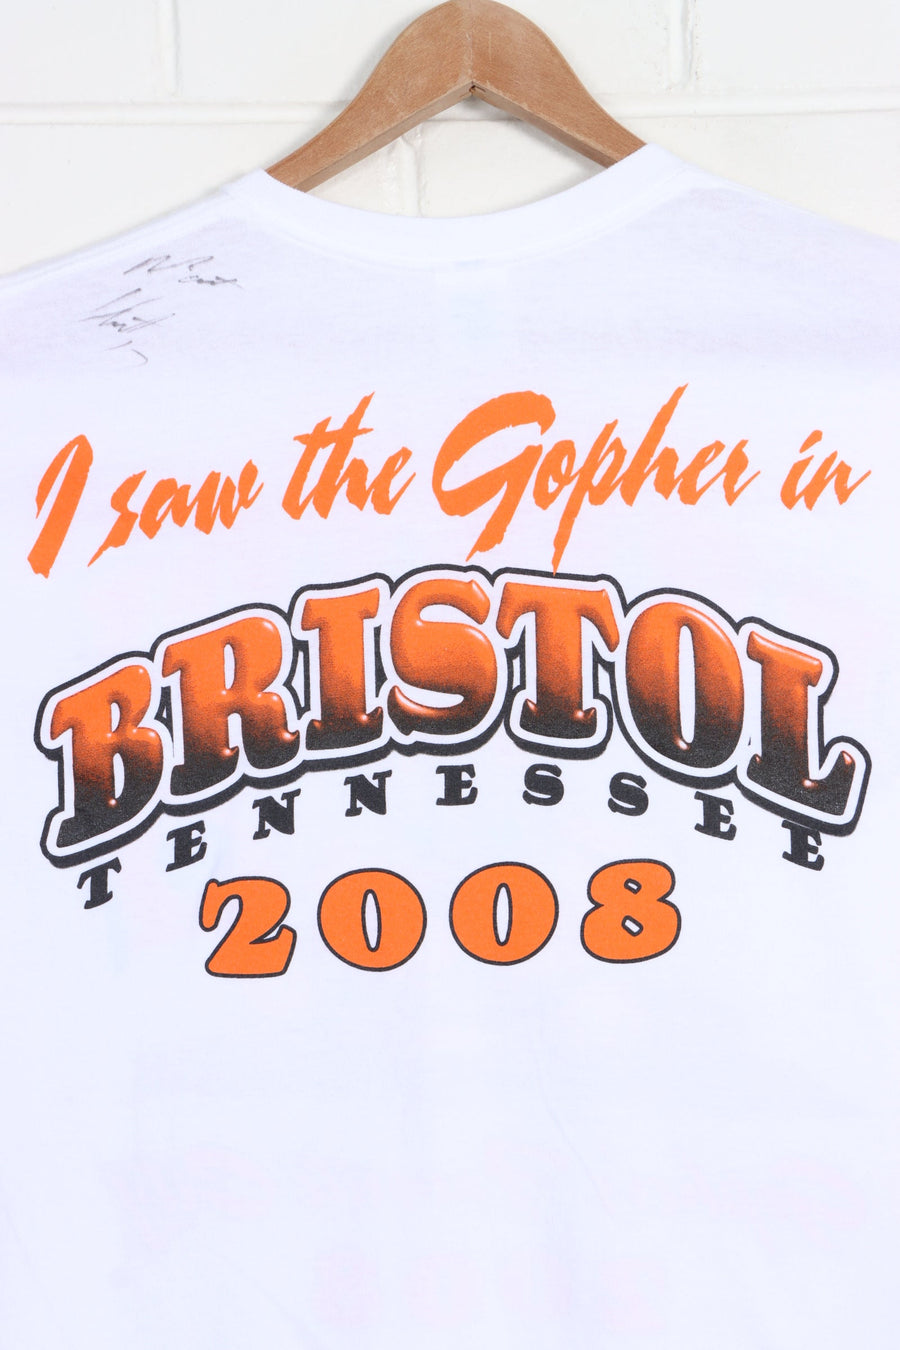 Autographed Gopher in Bristol Tennessee T-Shirt (S)